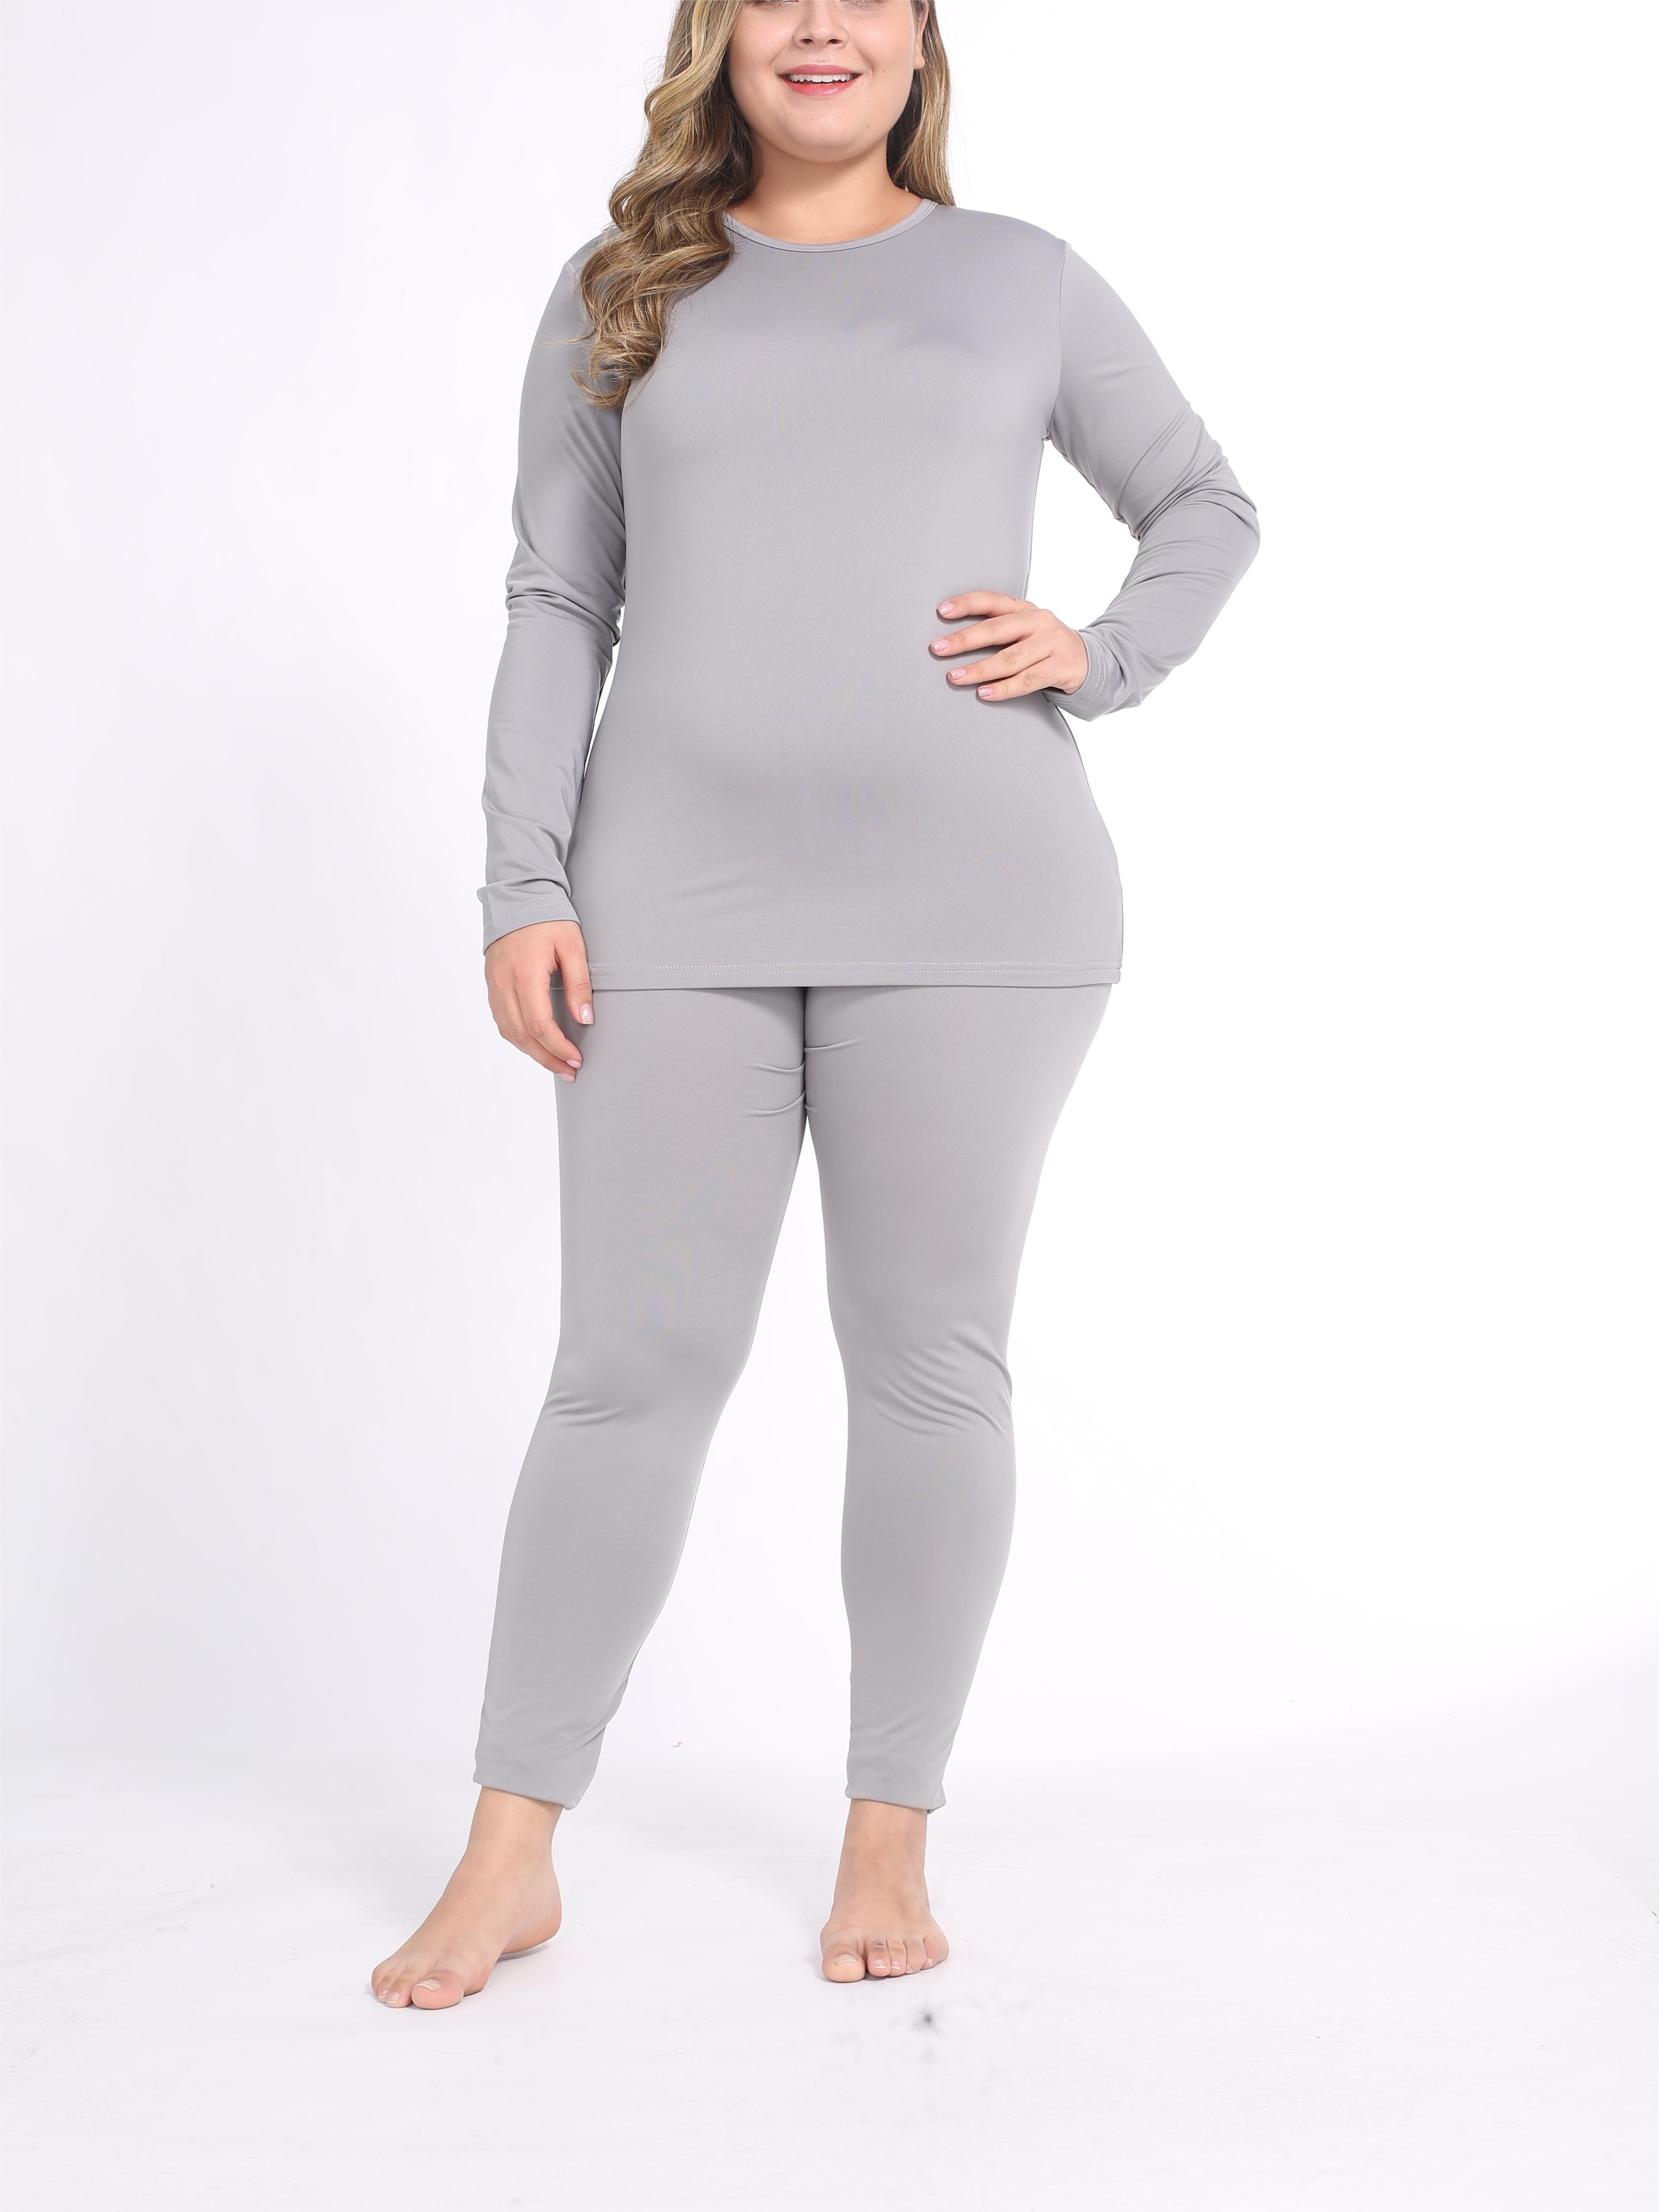 Plus Size Basic Thermal Underwear Set, Women's Plus Solid Long Sleeve Round  Neck Fleece Lined Top & Bottom Pajamas Two Piece Set